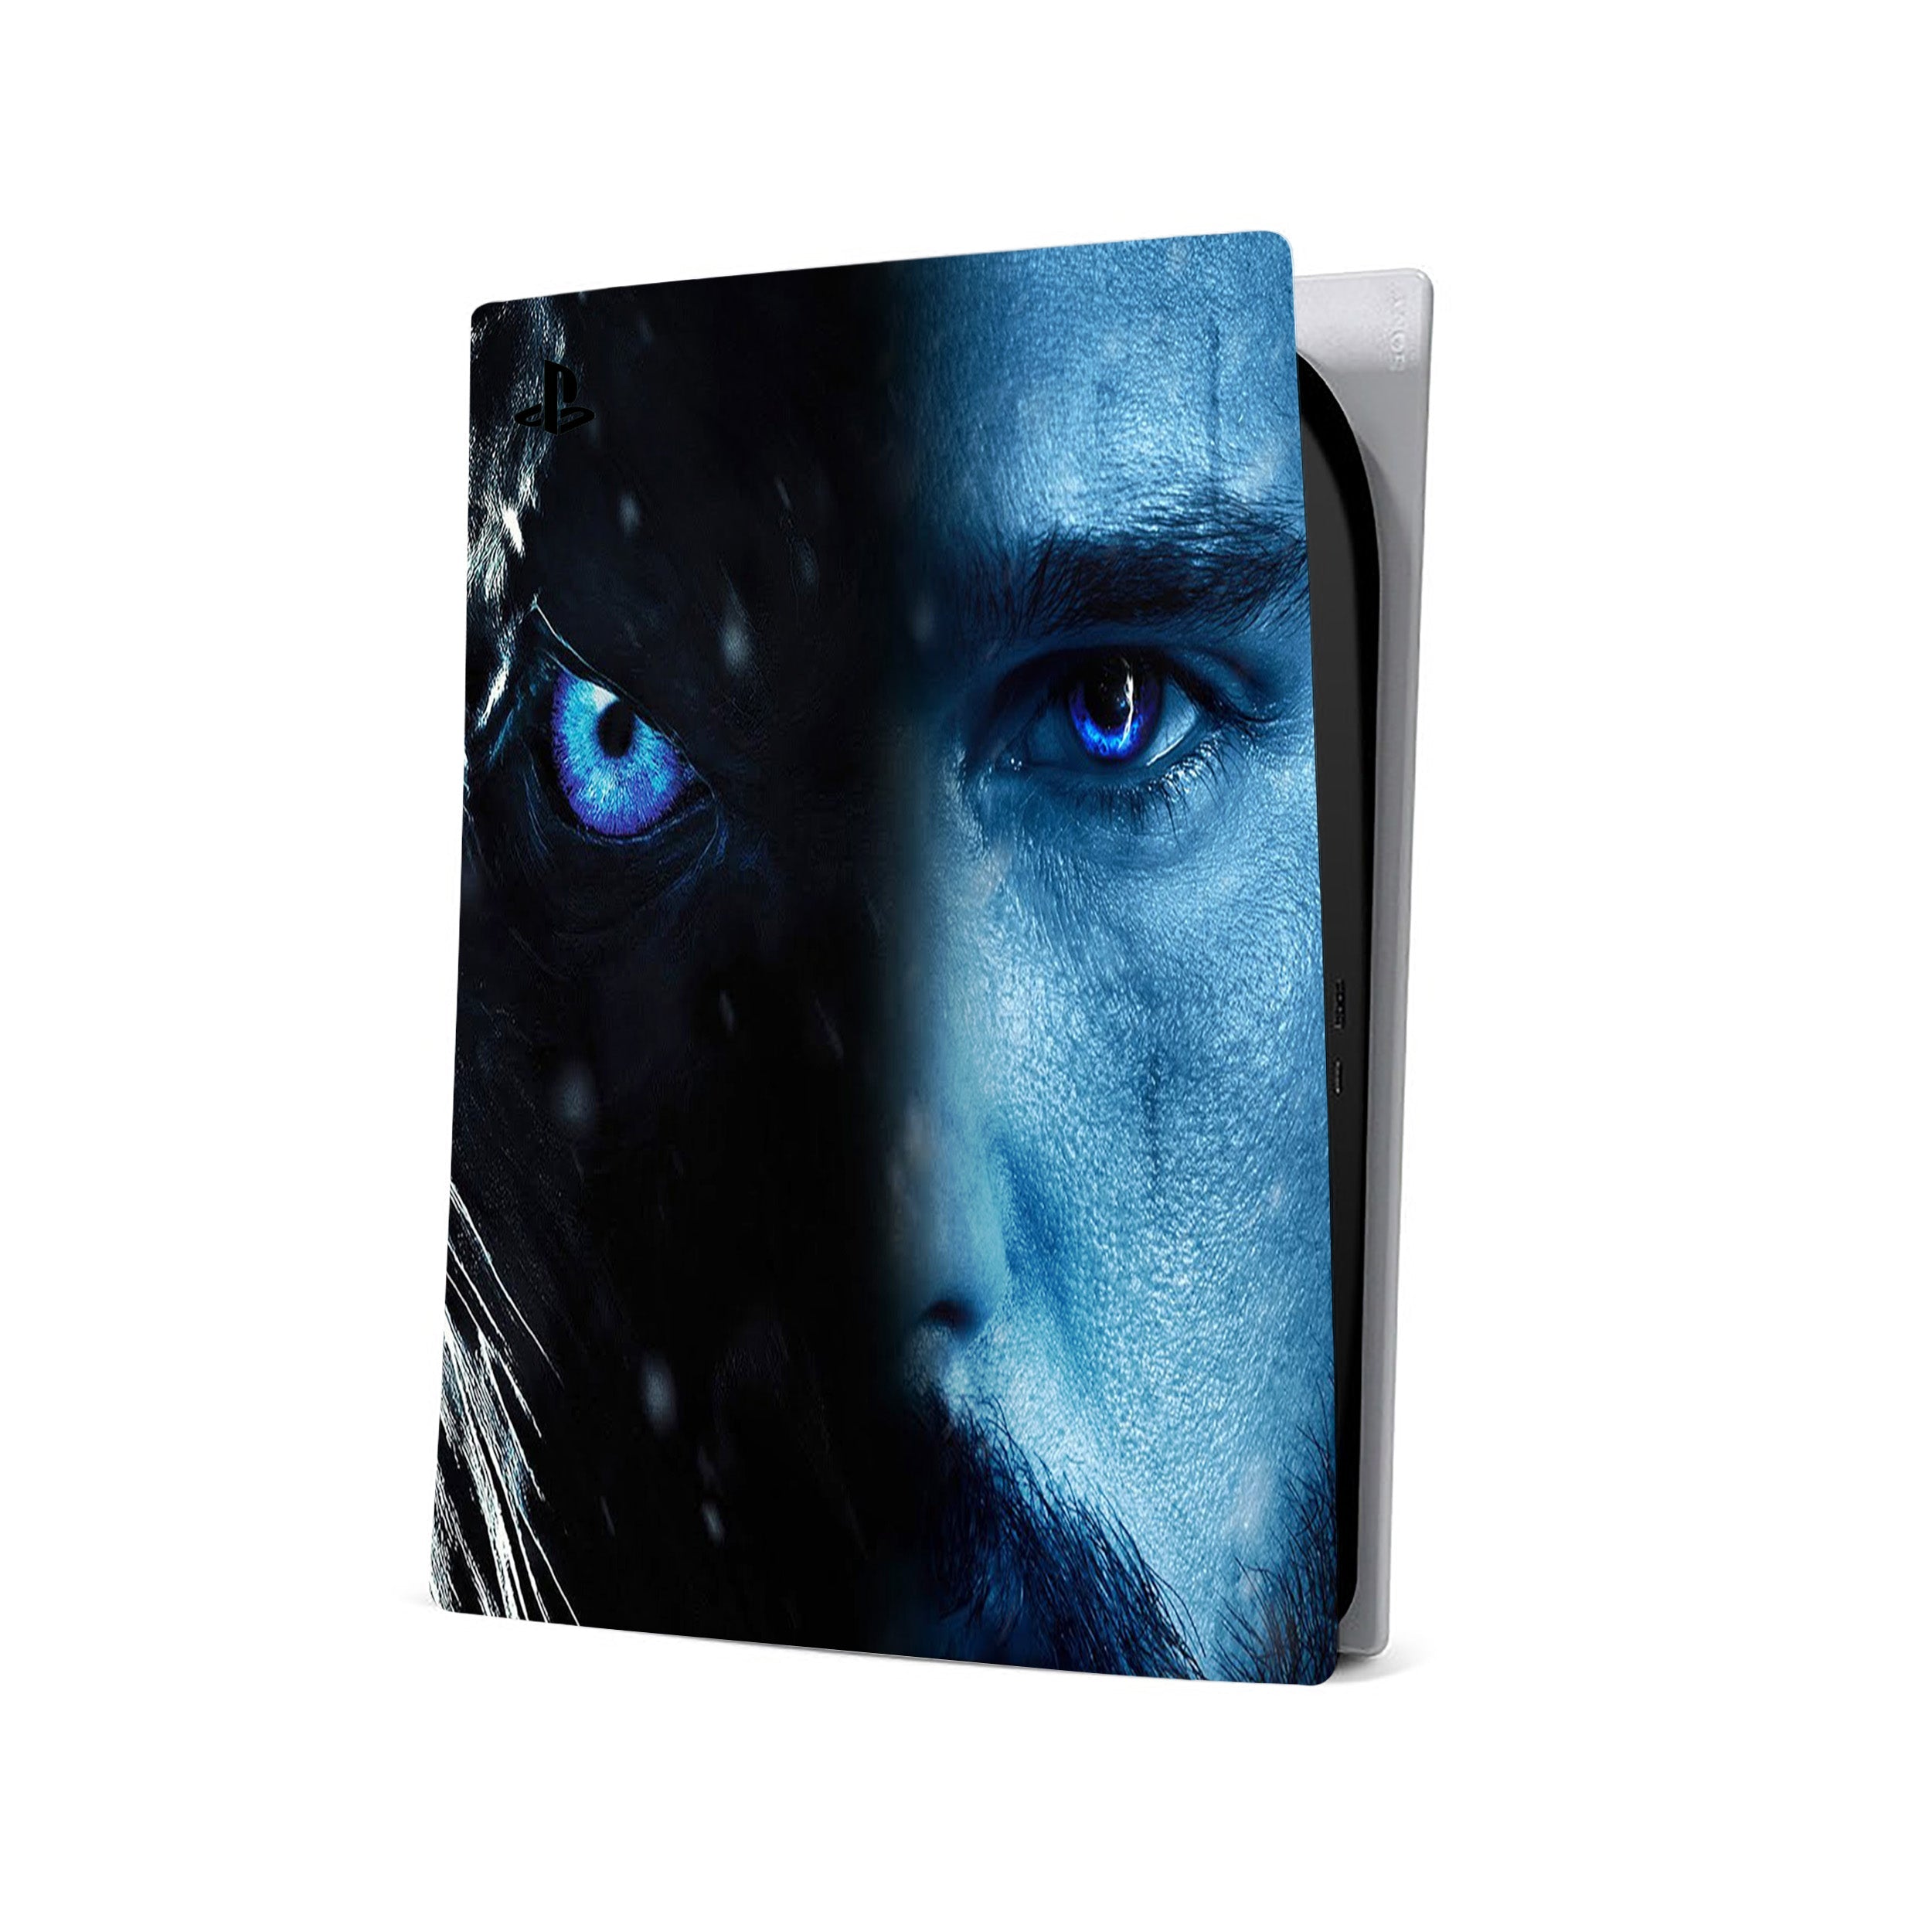 A video game skin featuring a Game Of Thrones Jon Snow design for the PS5.